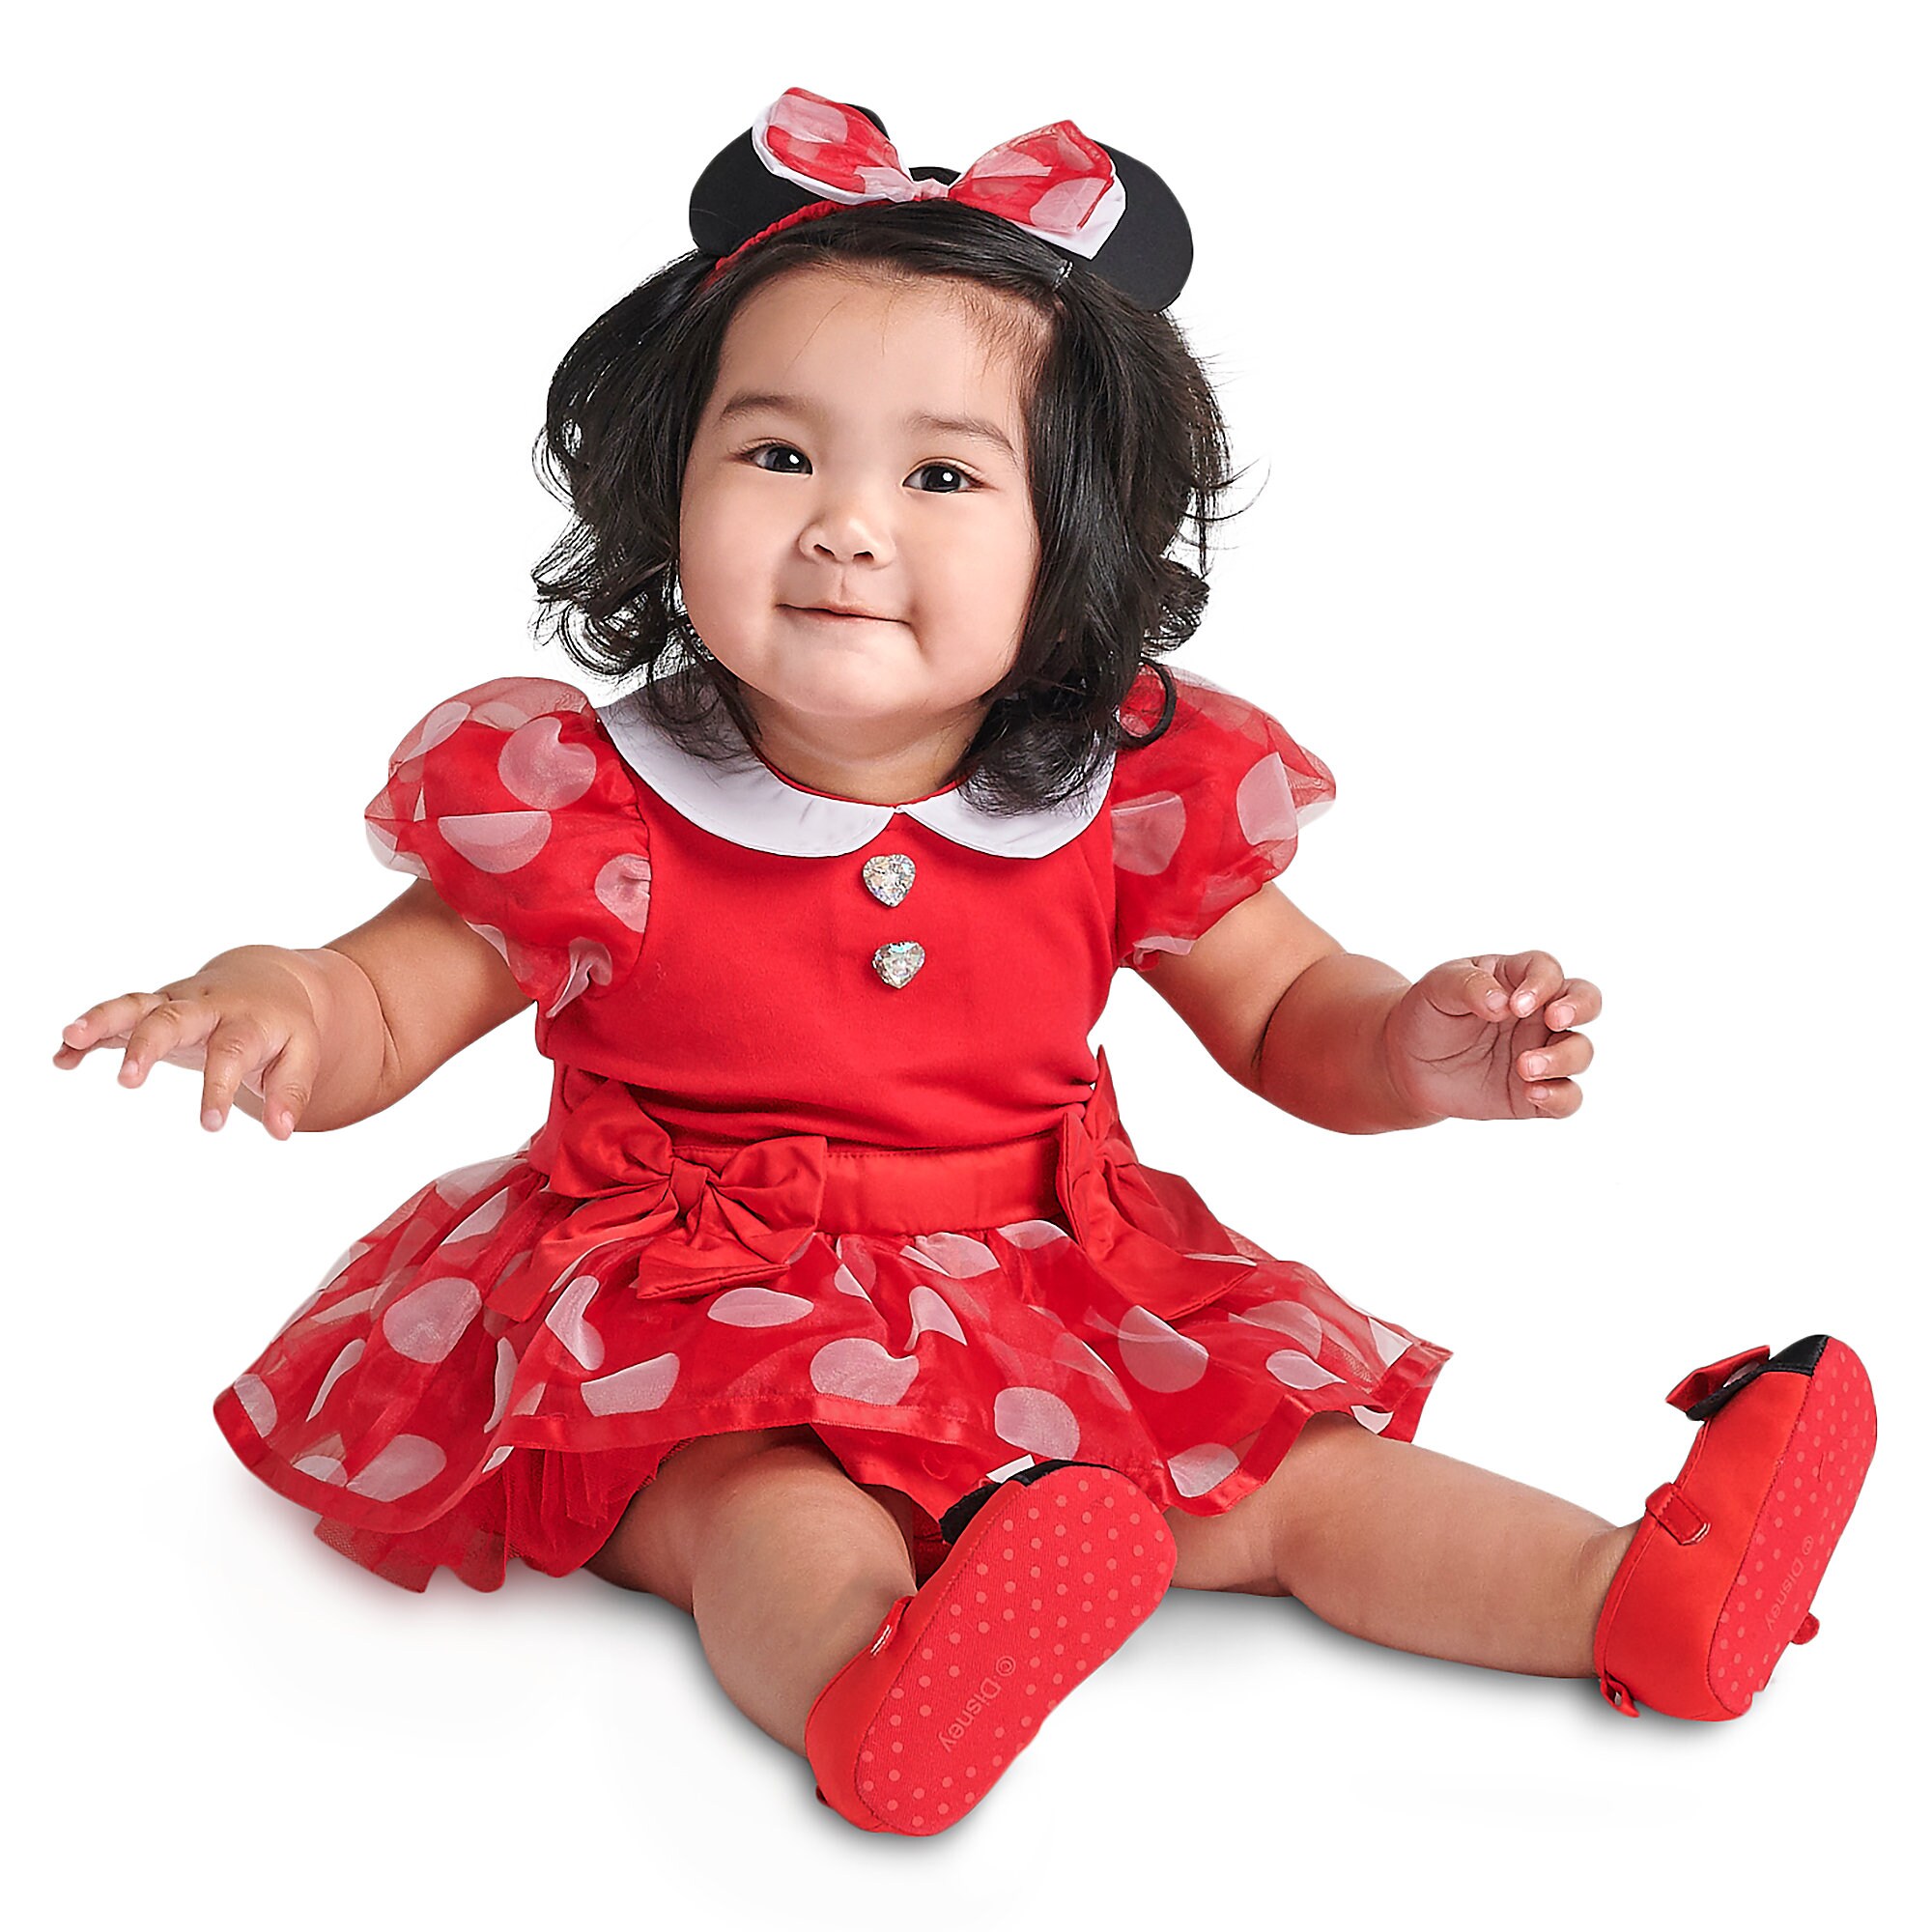 Minnie Mouse Costume Bodysuit for Baby - Red